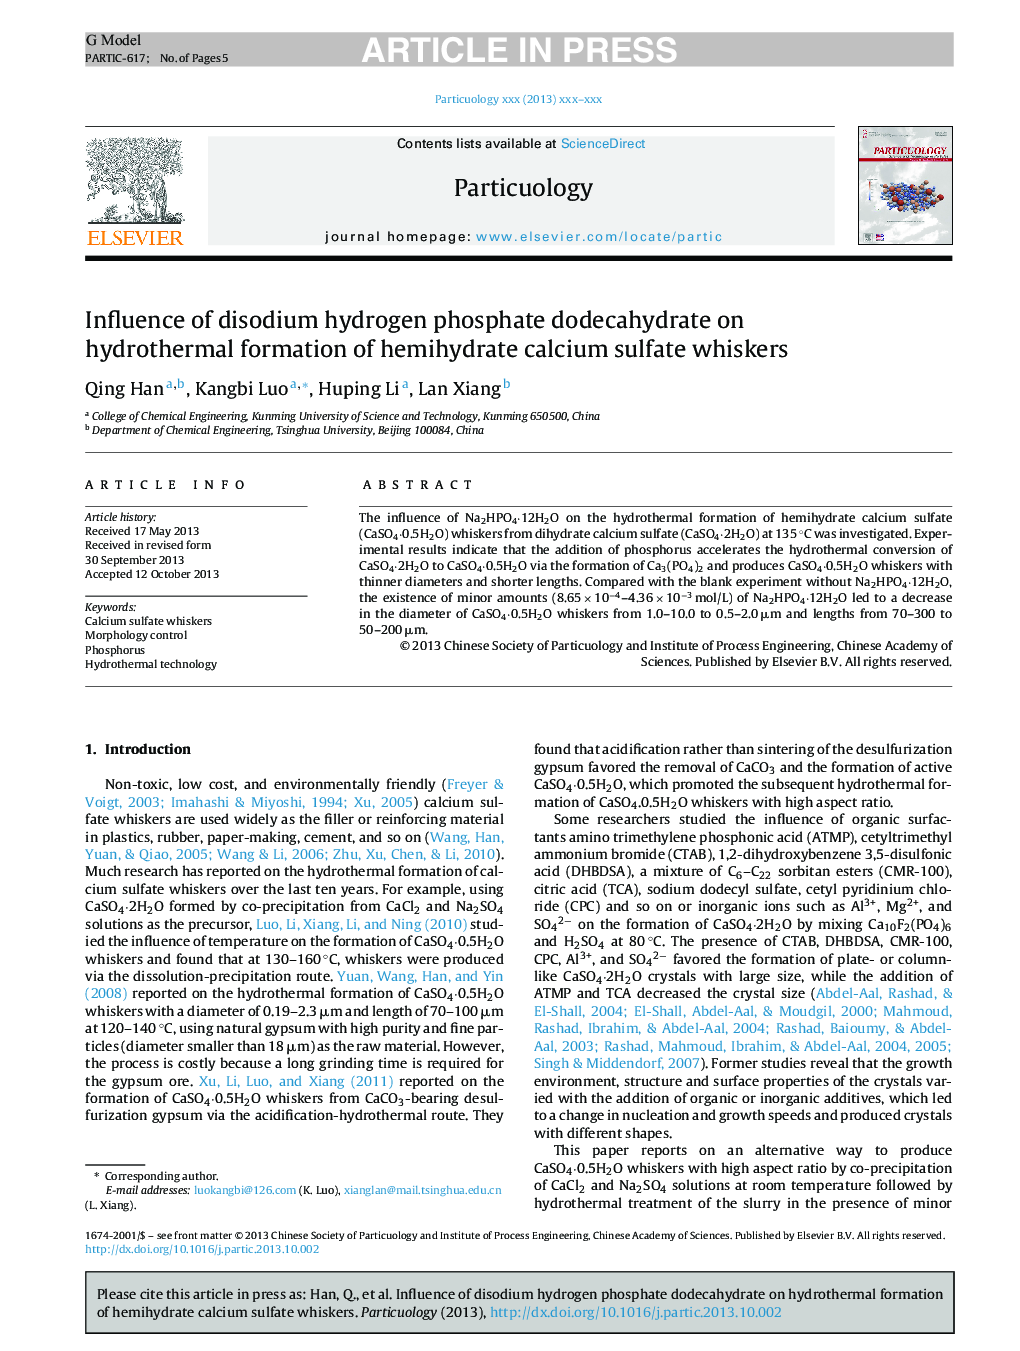 Influence of disodium hydrogen phosphate dodecahydrate on hydrothermal formation of hemihydrate calcium sulfate whiskers